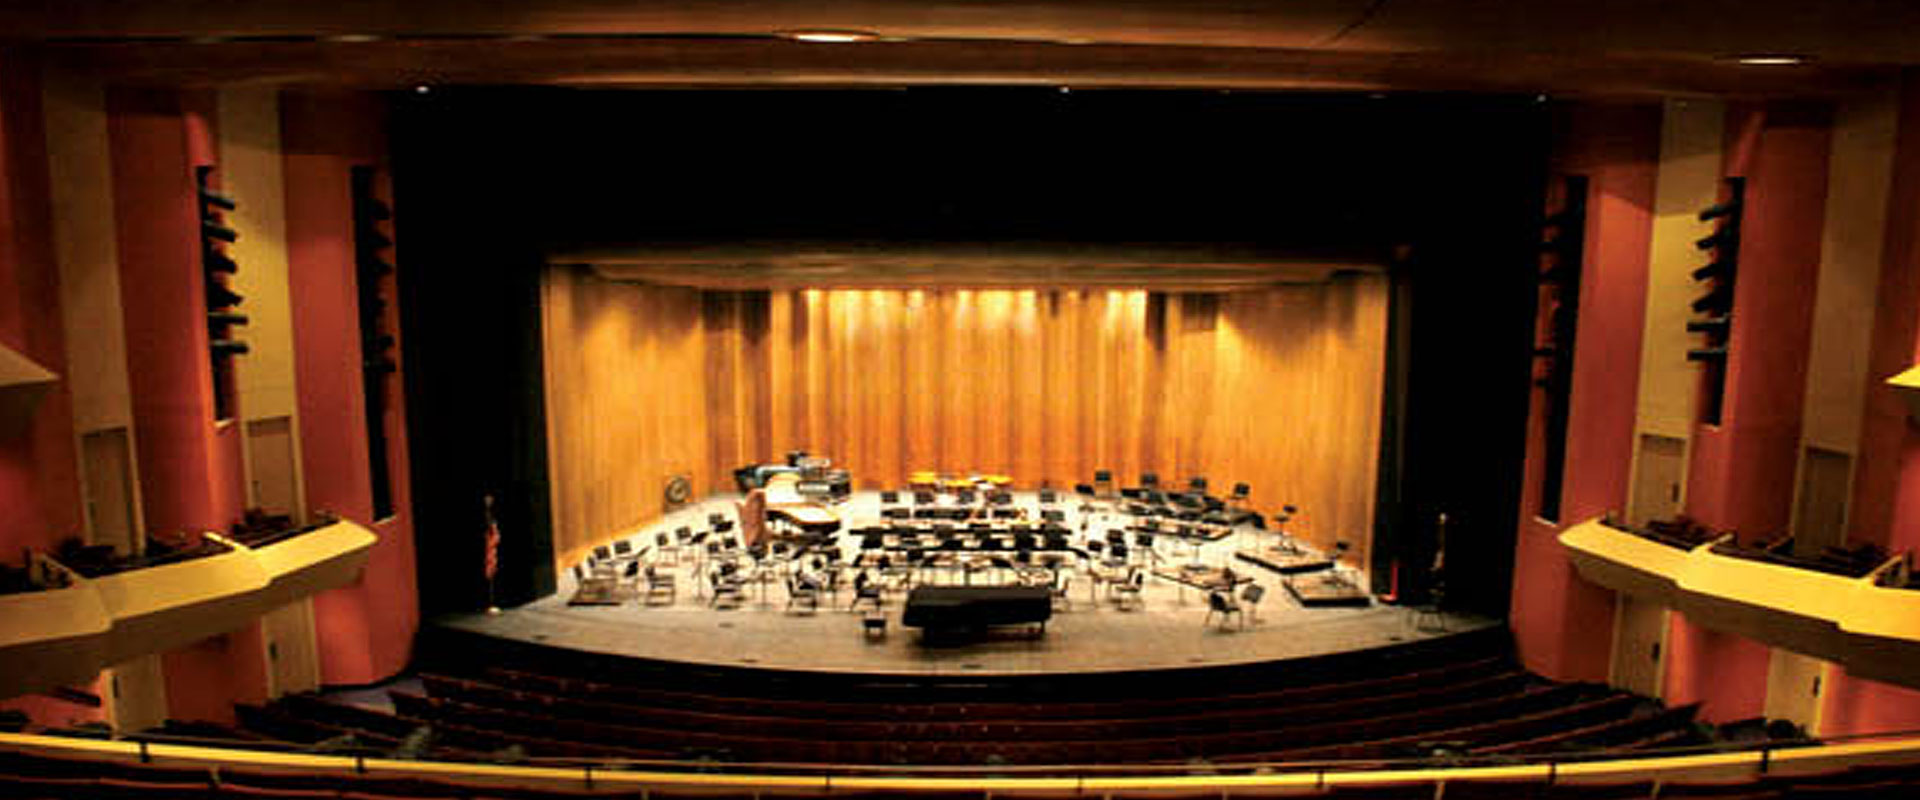 Whitney Hall, Kentucky Center for the Performing Arts